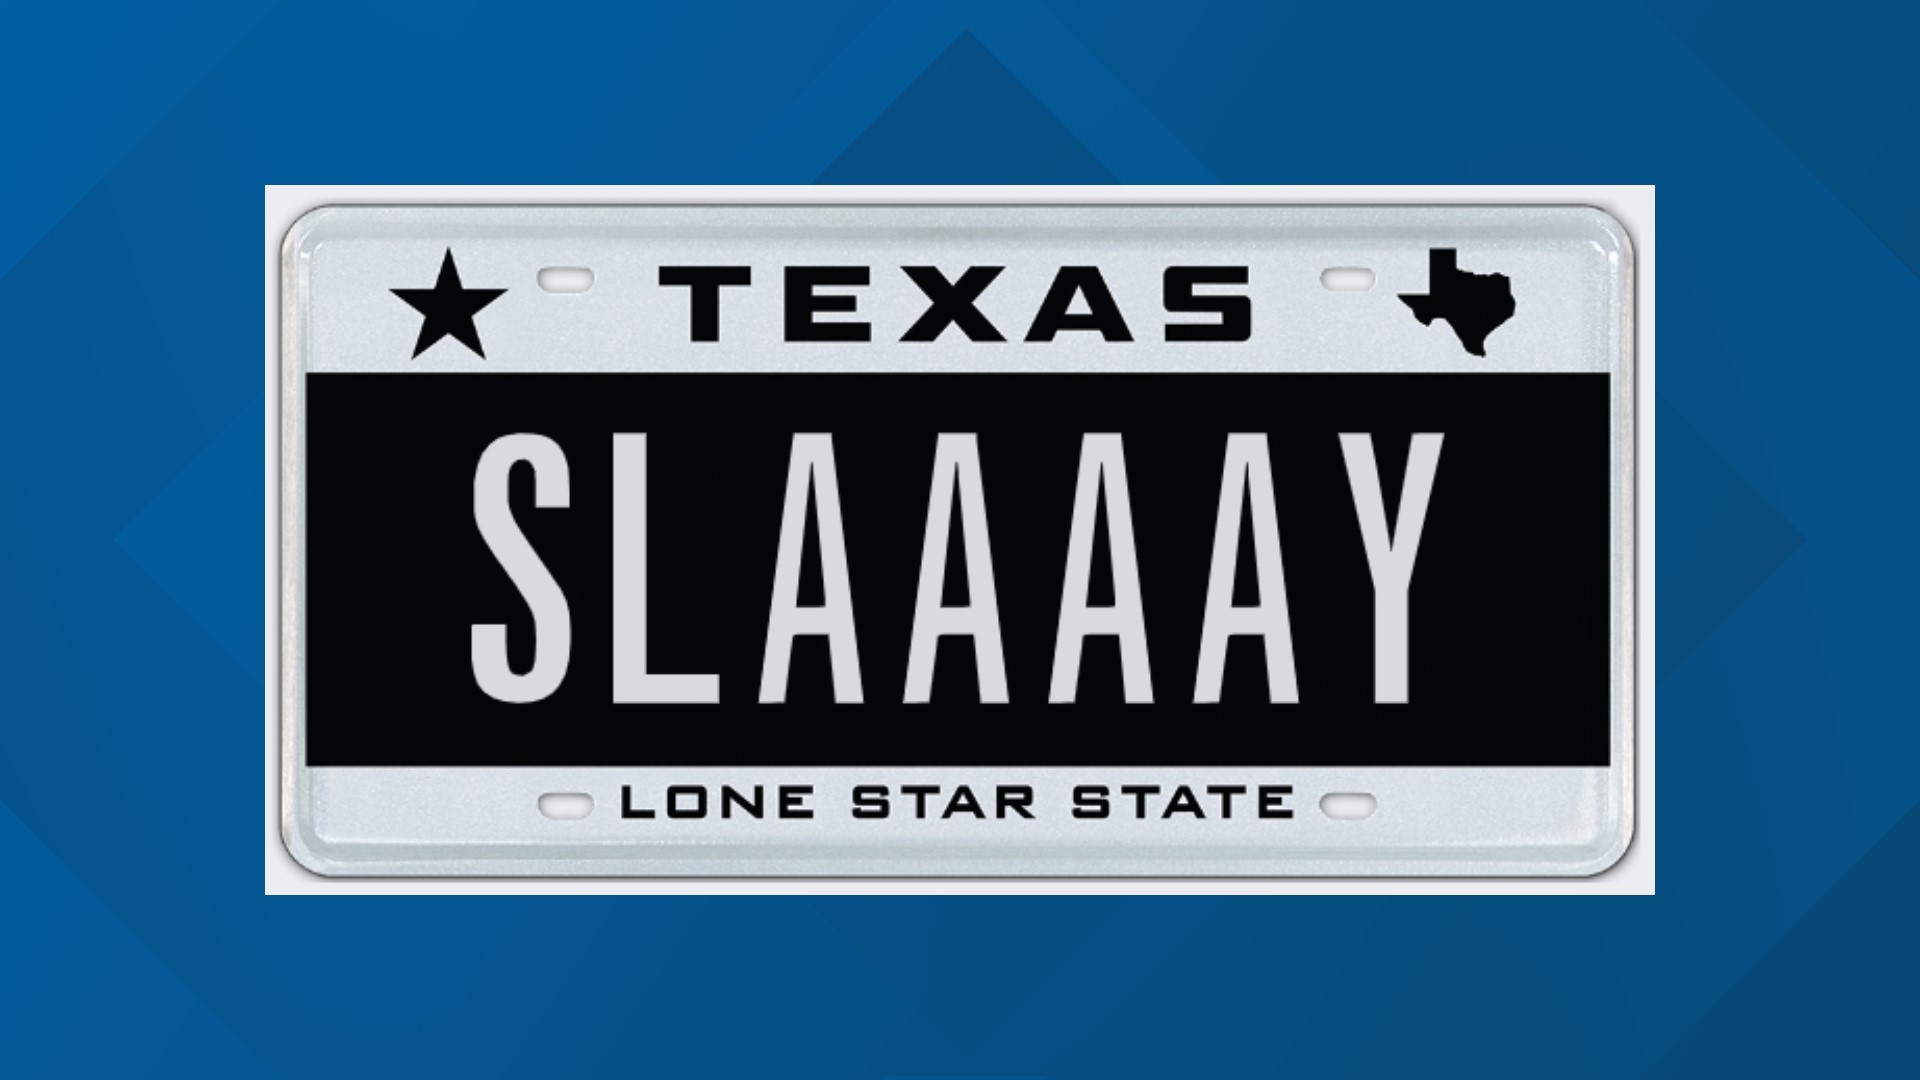 The Texas Department of Motor Vehicles has released its list of denied or rejected personalized license plates for 2023.